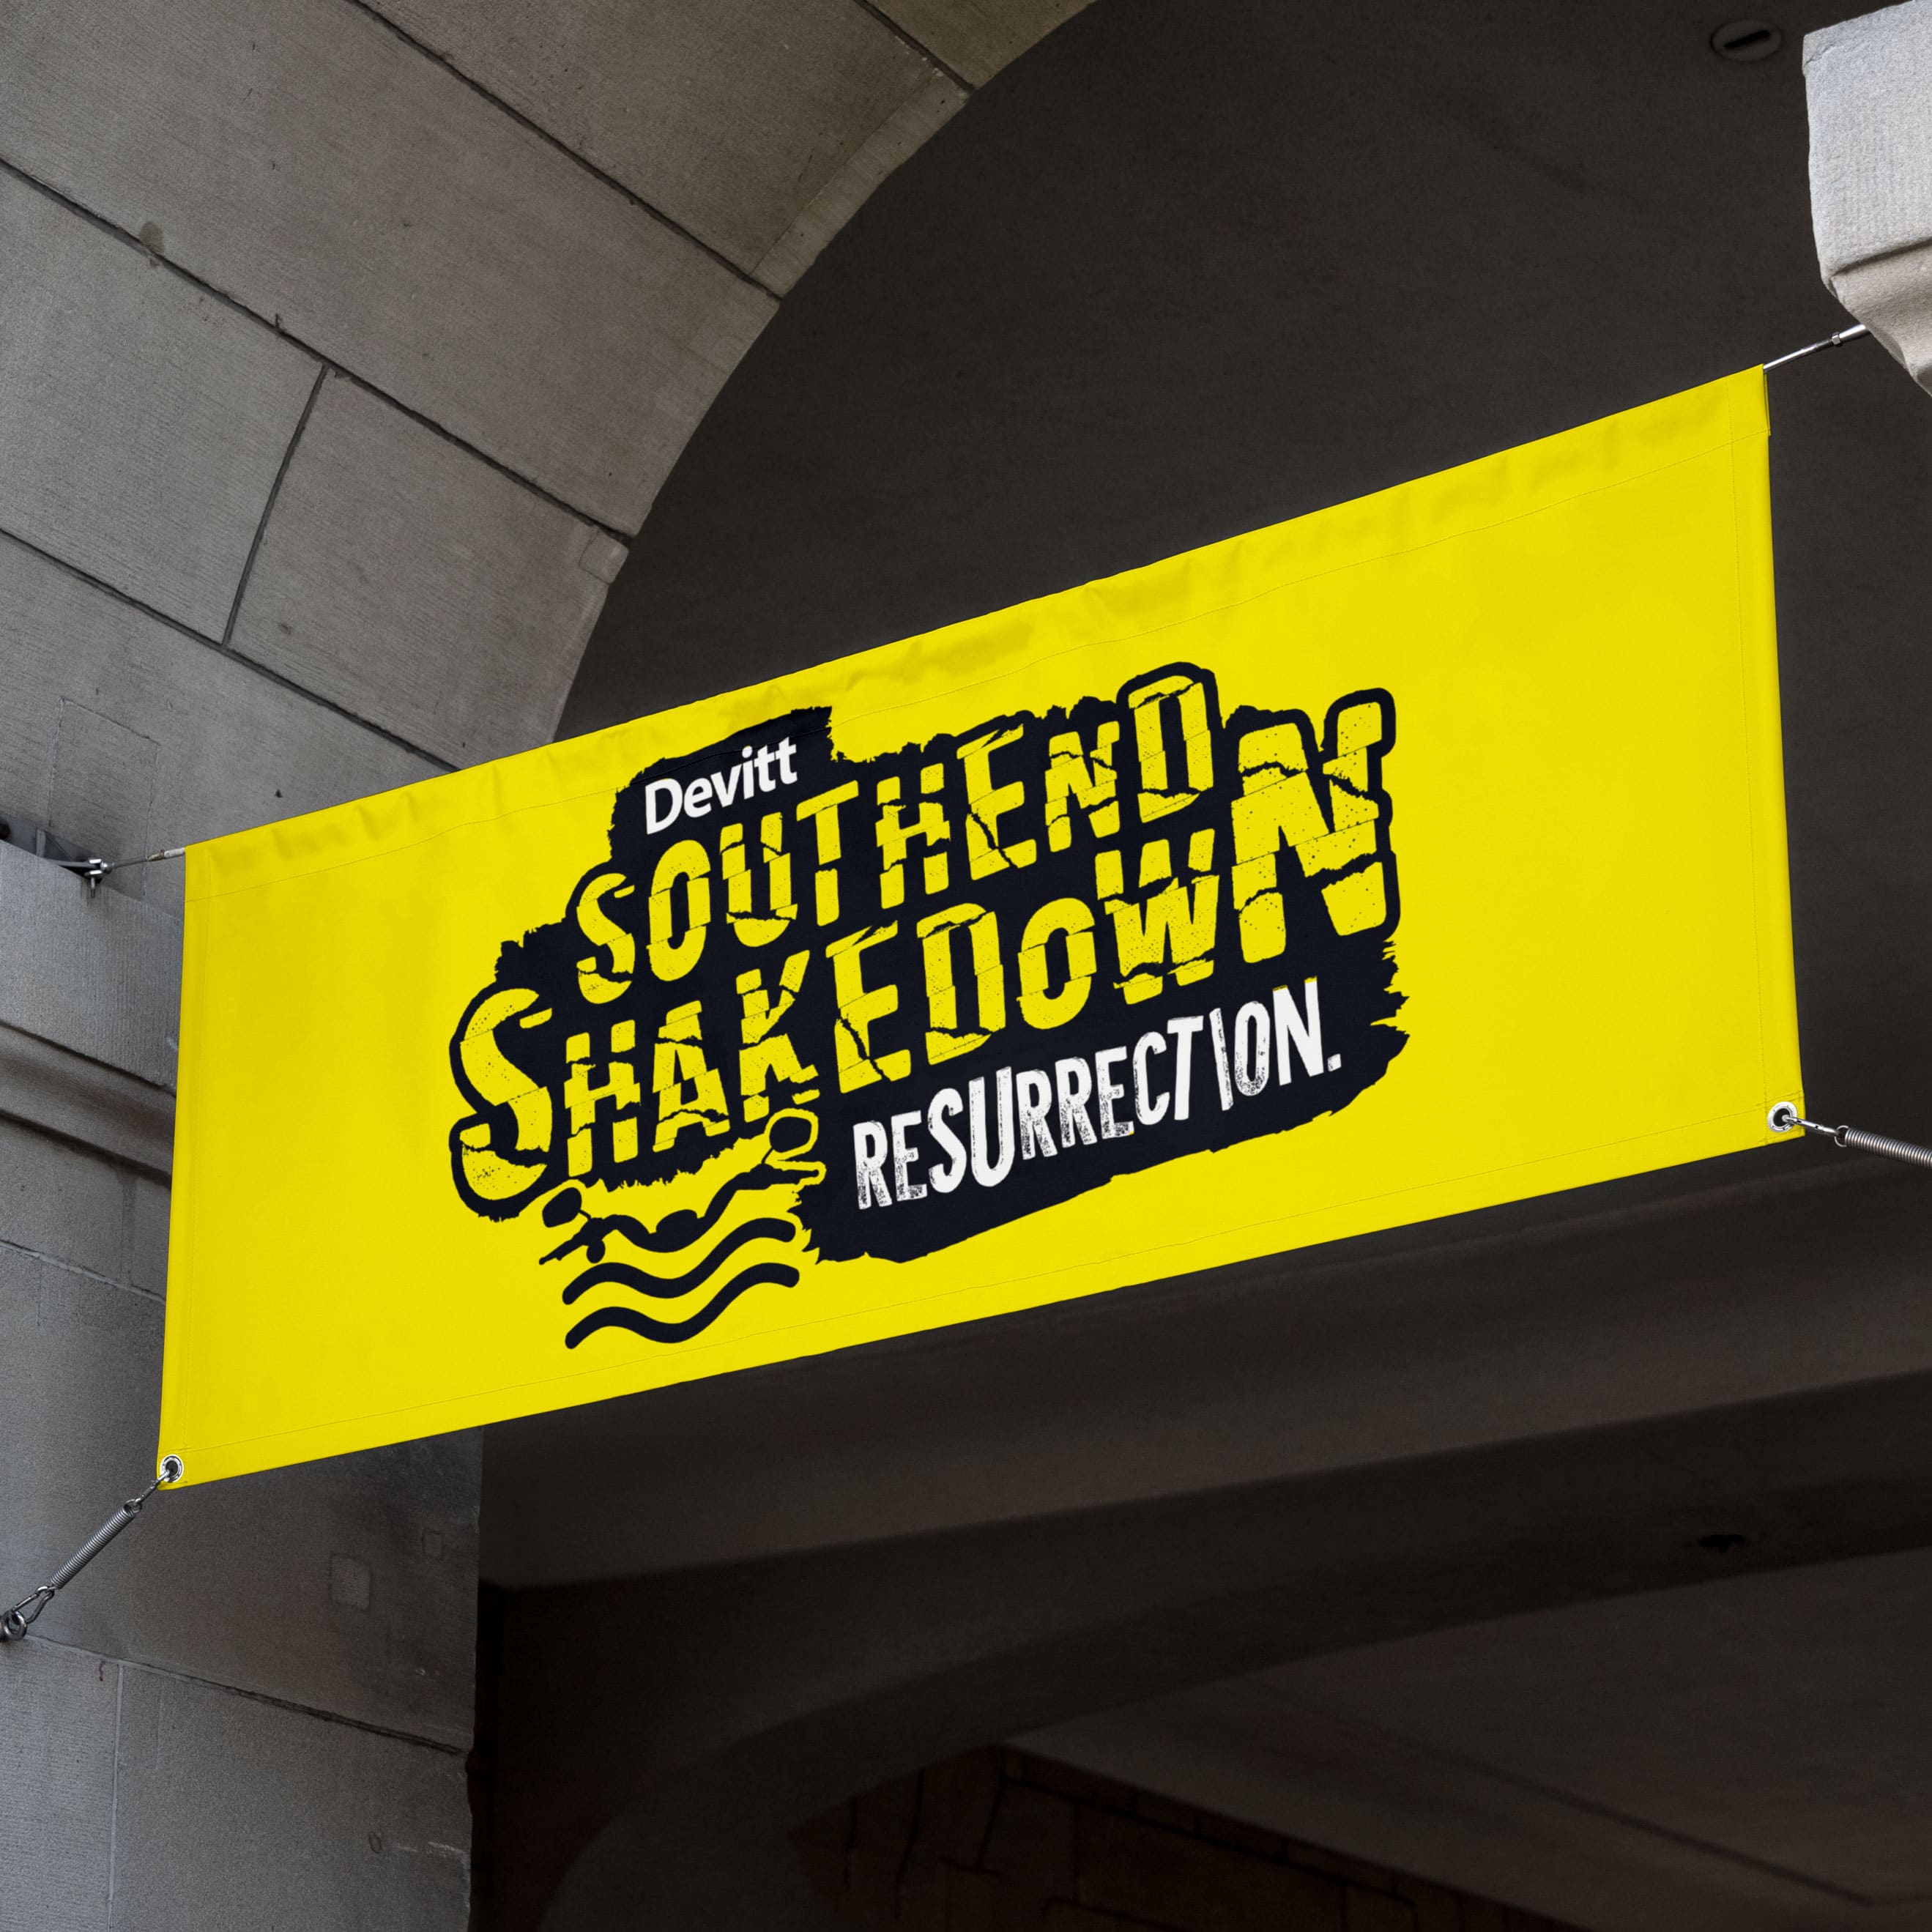 southend shakedown banner